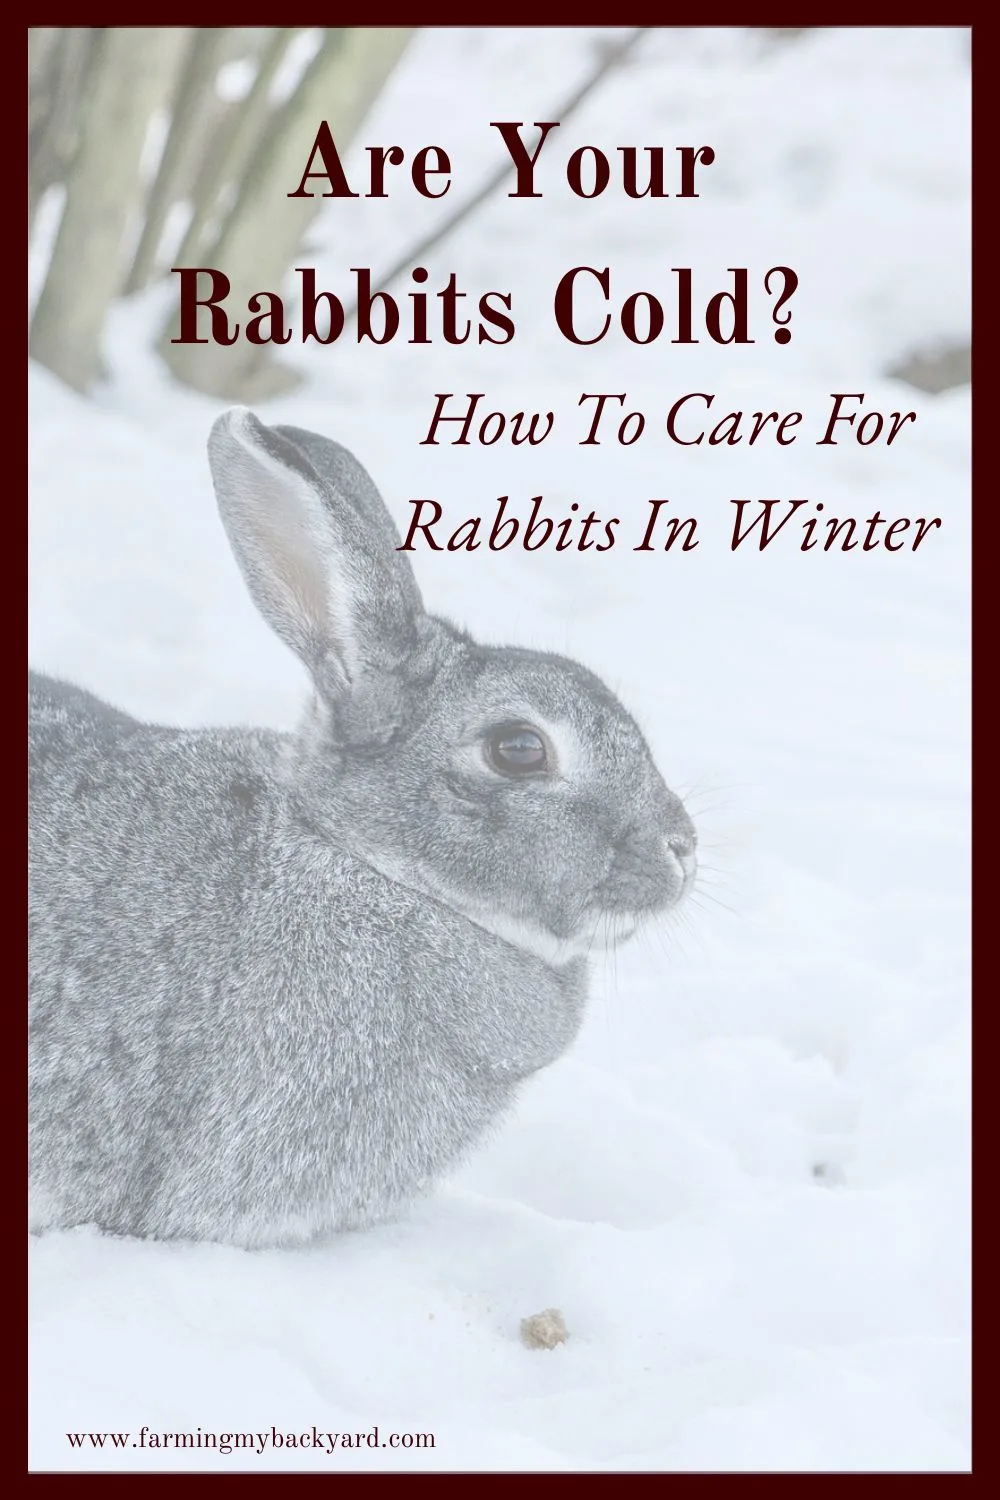 Are your rabbits cold? Caring for rabbits in winter is pretty easy, but they do need a little extra care and attention to stay comfortable.